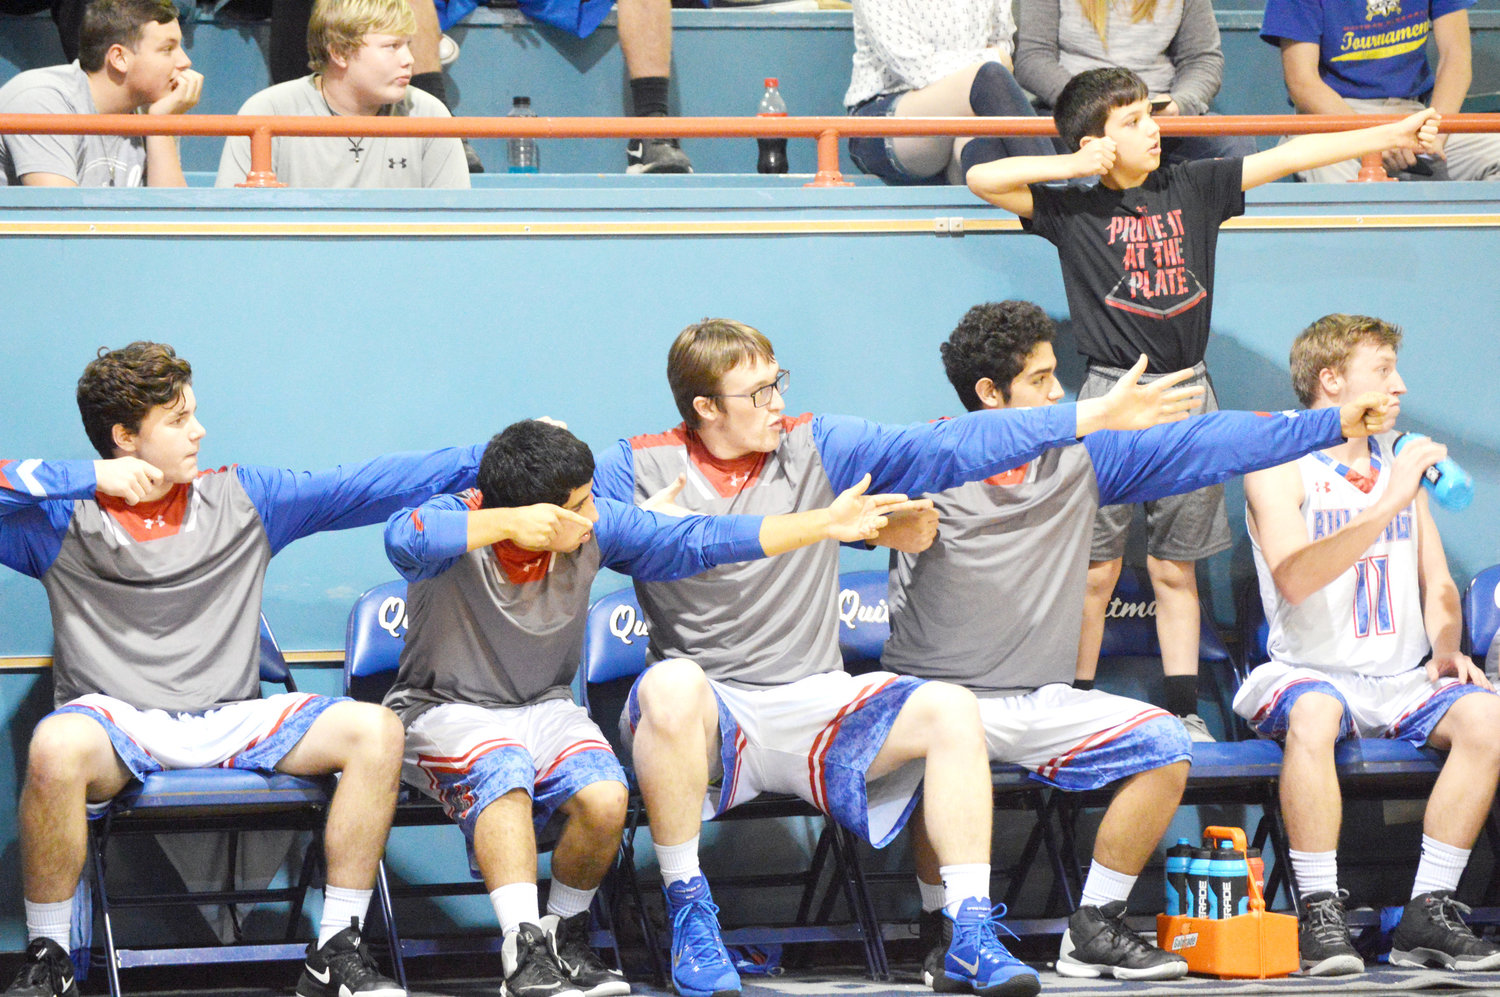 Members of the Quitman Bulldogs get ready to pull the trigger for a teammate at the free throw line in the Kemp game. They are, from left, Luke Pruden, Jose Delgadillo, Brian McDade, Javier Roman, Cort Reid and Garrett Peek who is taking a break. (Monitor photo by Larry Tucker)